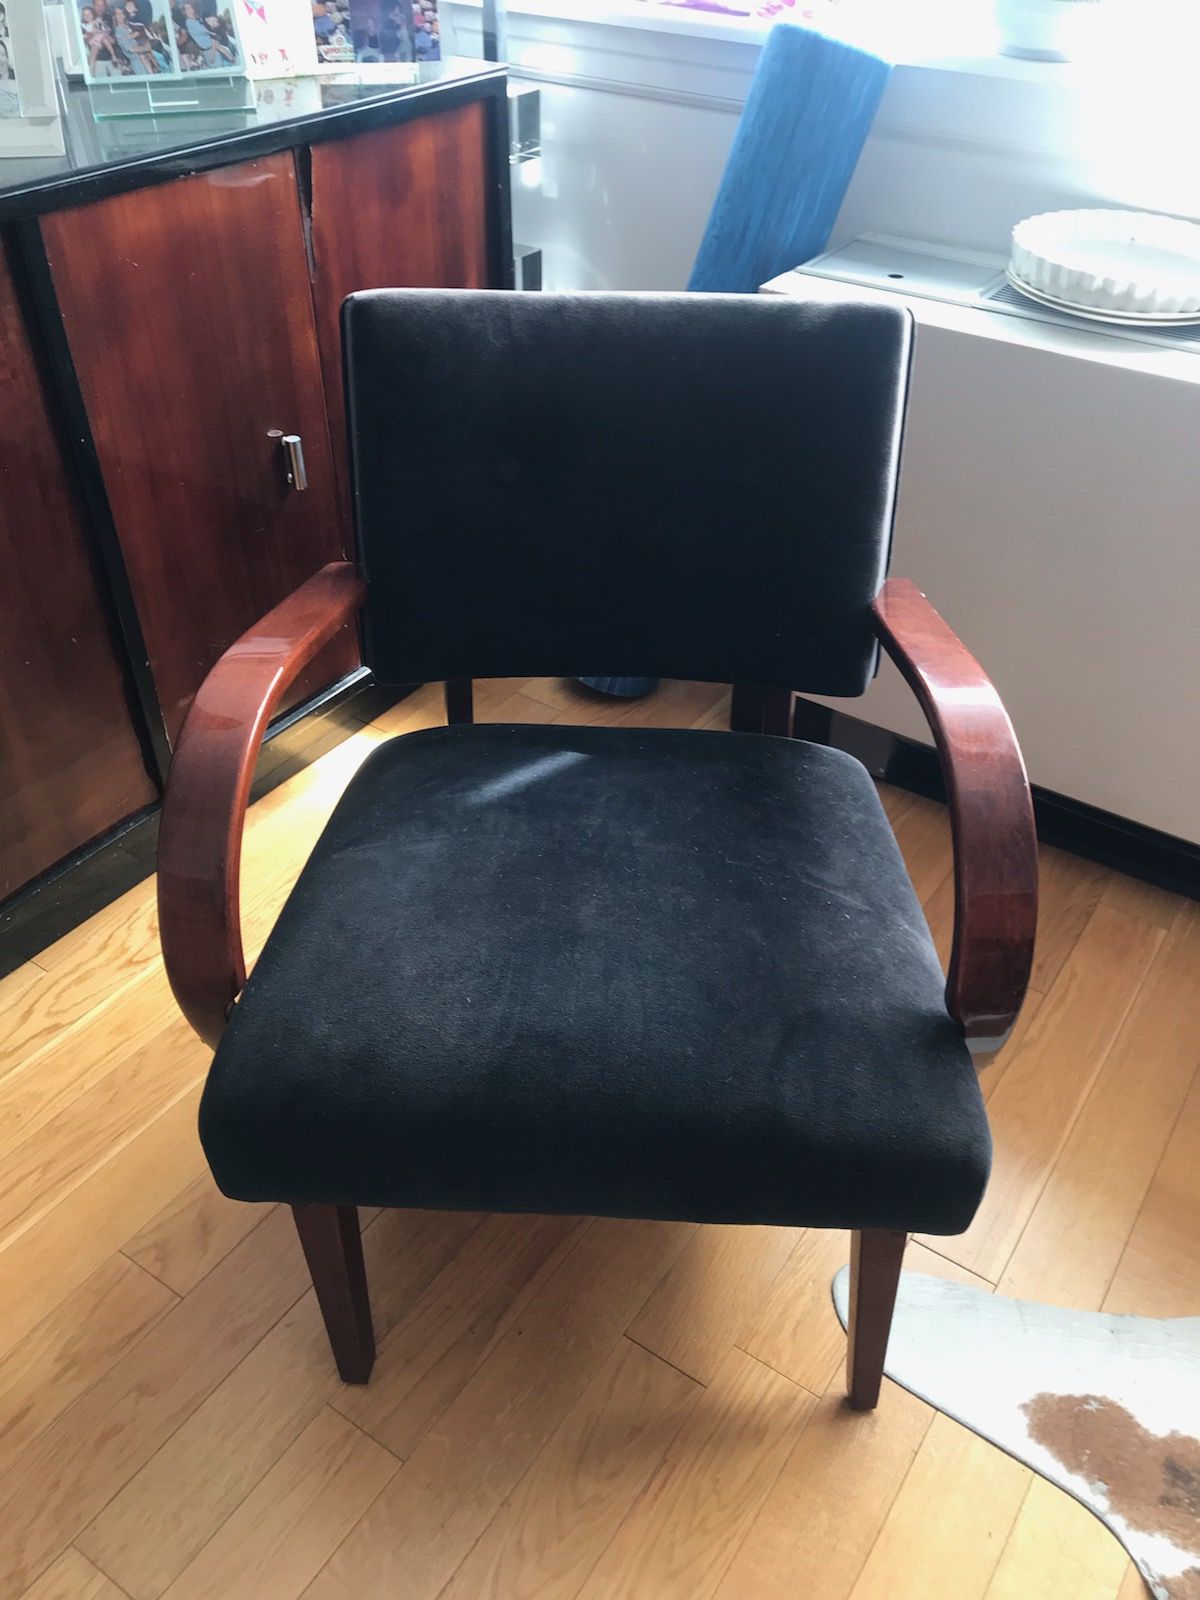 2 mid century modern chairs (together or single)